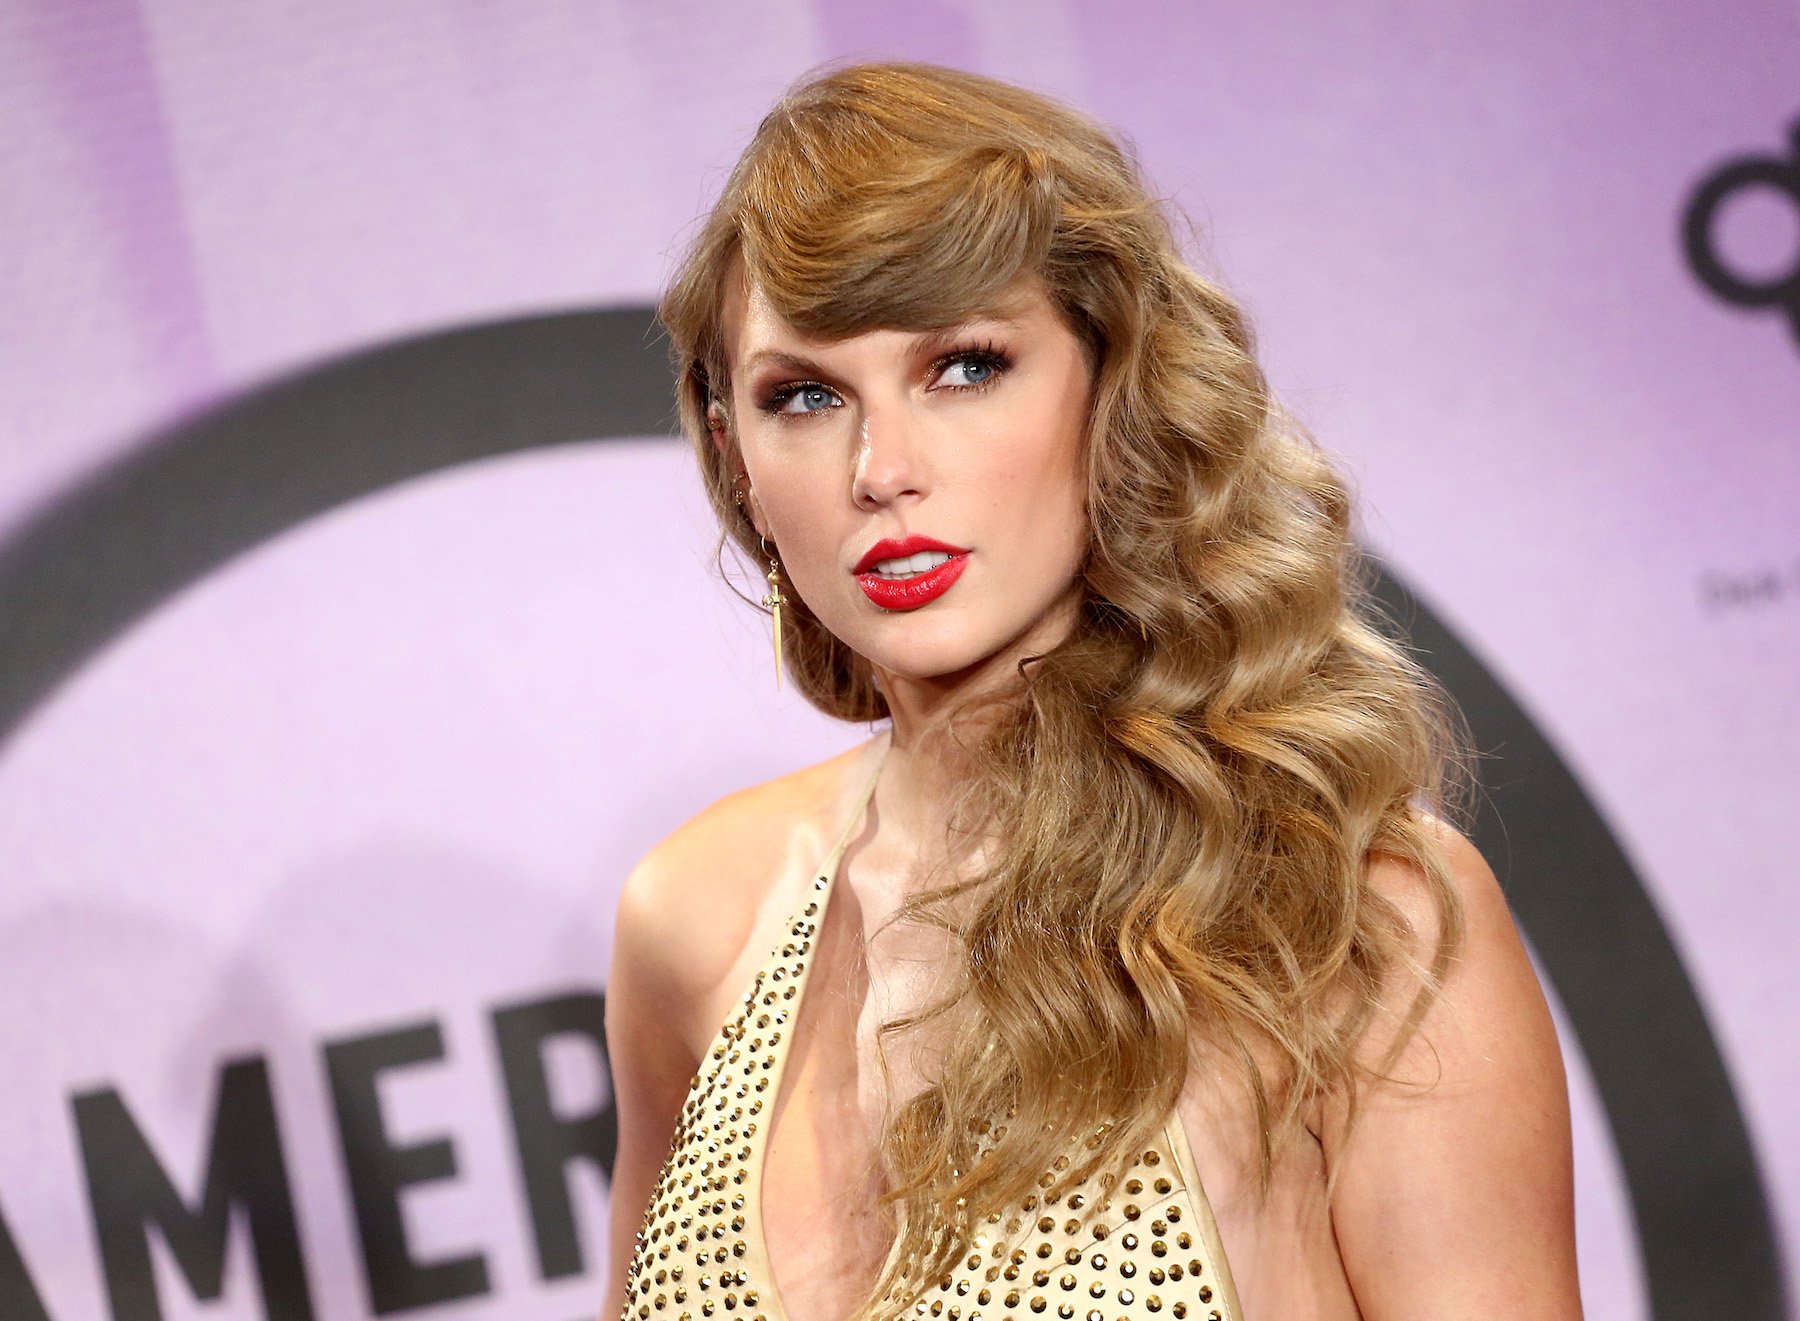 'Midnights' artist Taylor Swift on the red carpet wearing a gold dress